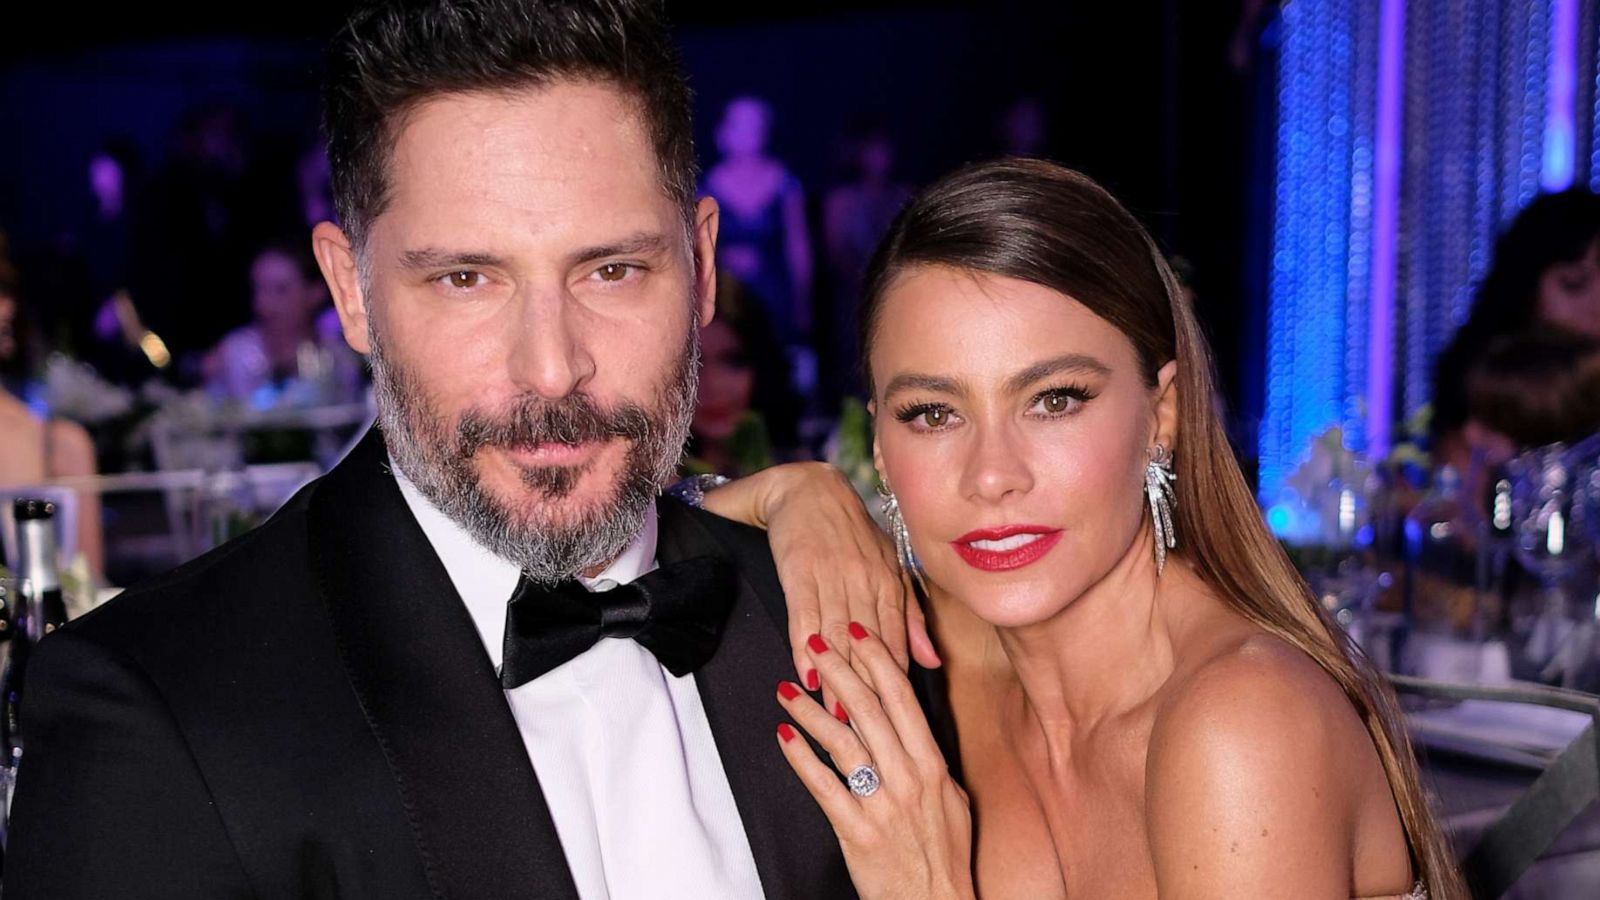 Actress Sofia Vergara and actor Joe Manganiello divorcing after 7 years of  marriage